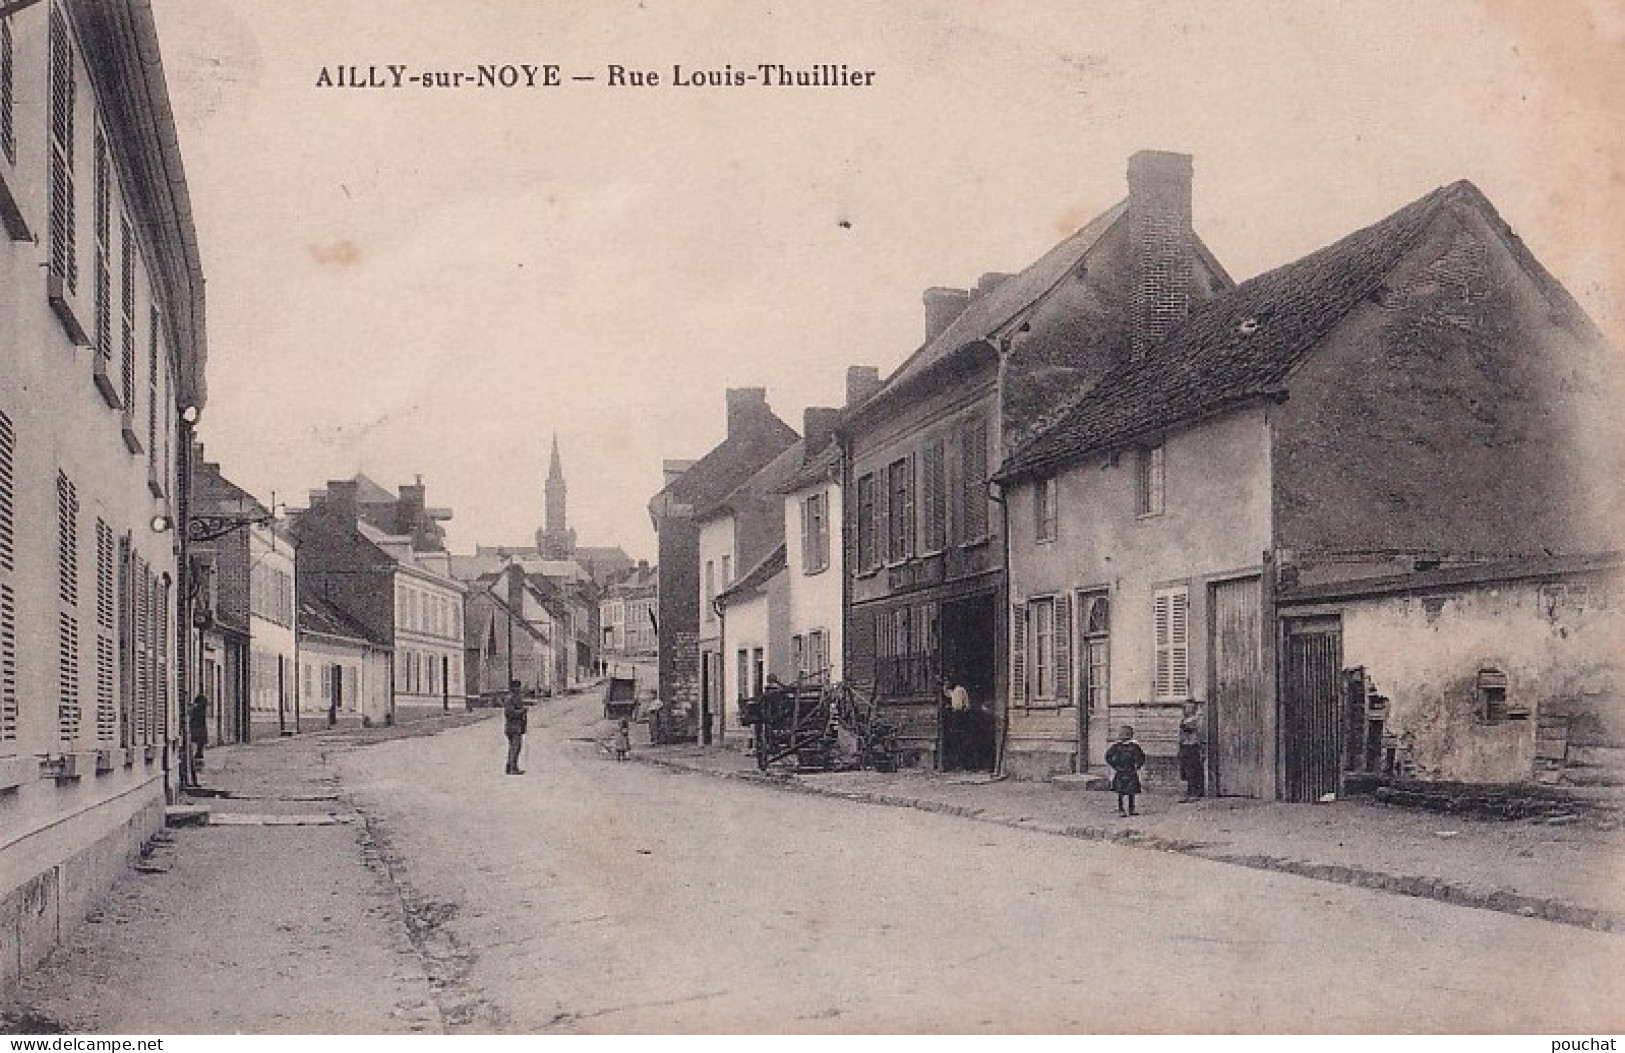 A16-80) AILLY SUR NOYE - RUE LOUIS THUILLIER  - ANIMEE - HABITANTS - ( 2 SCANS ) - Ailly Sur Noye